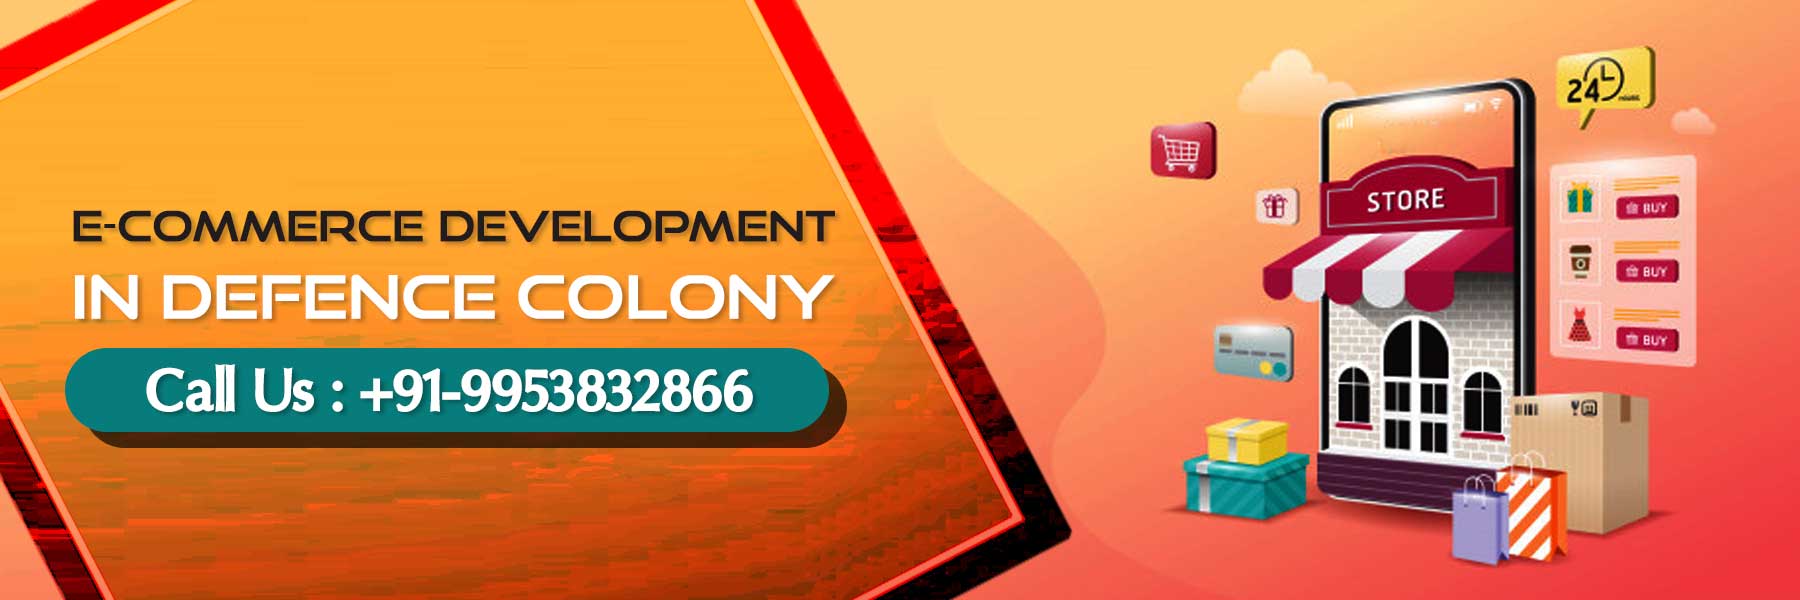 ecommerce development in Defence Colony